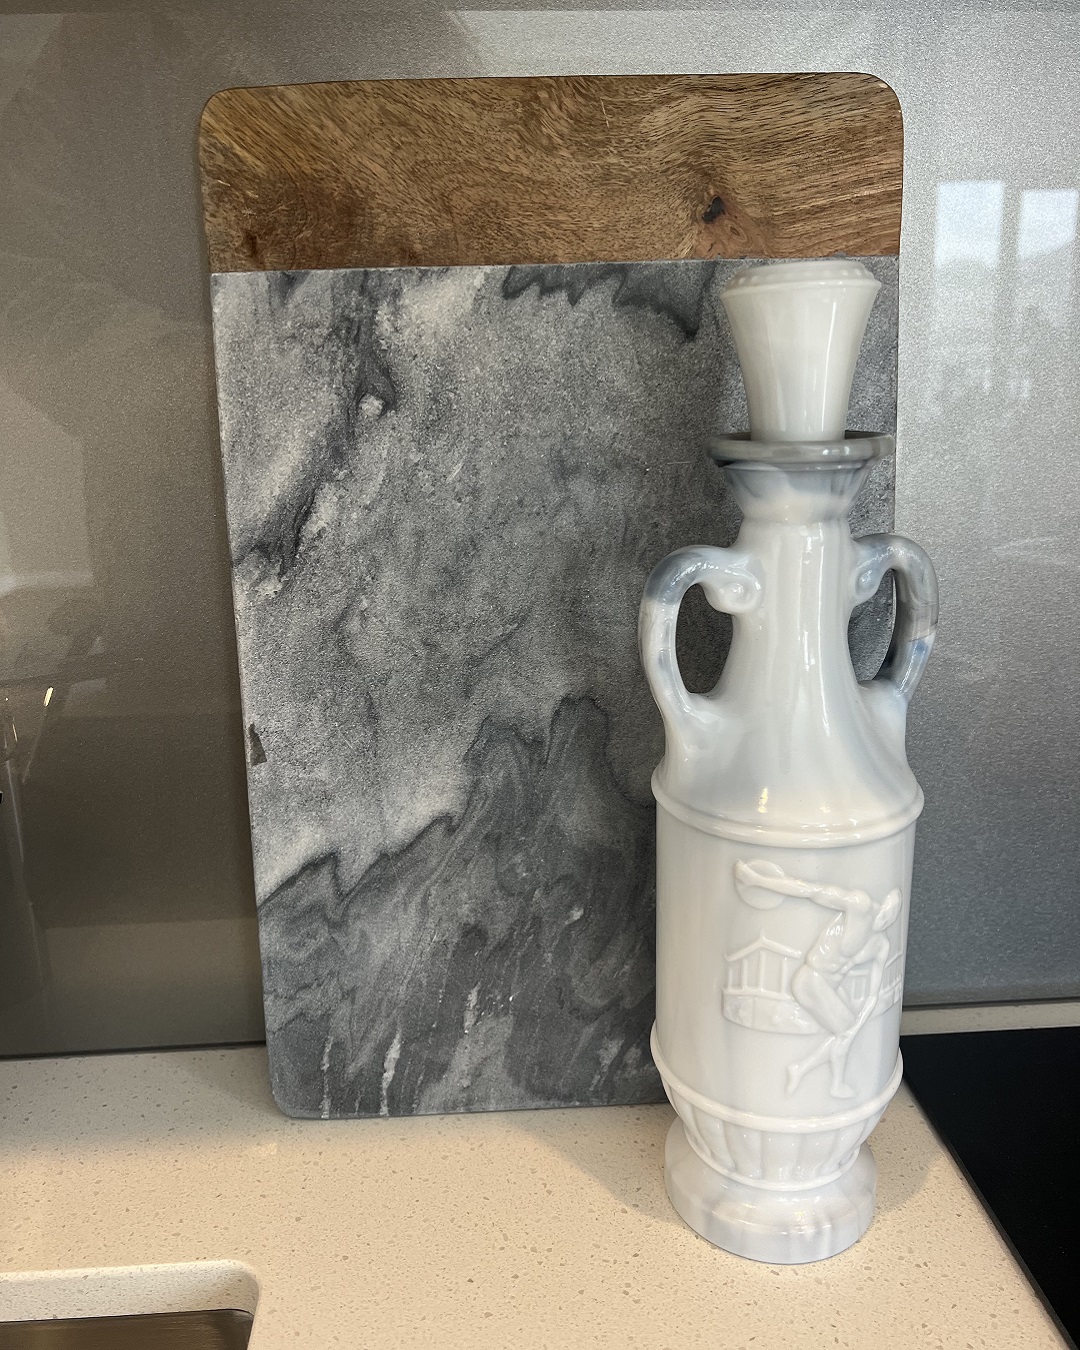 Marble and wood board and old decanter